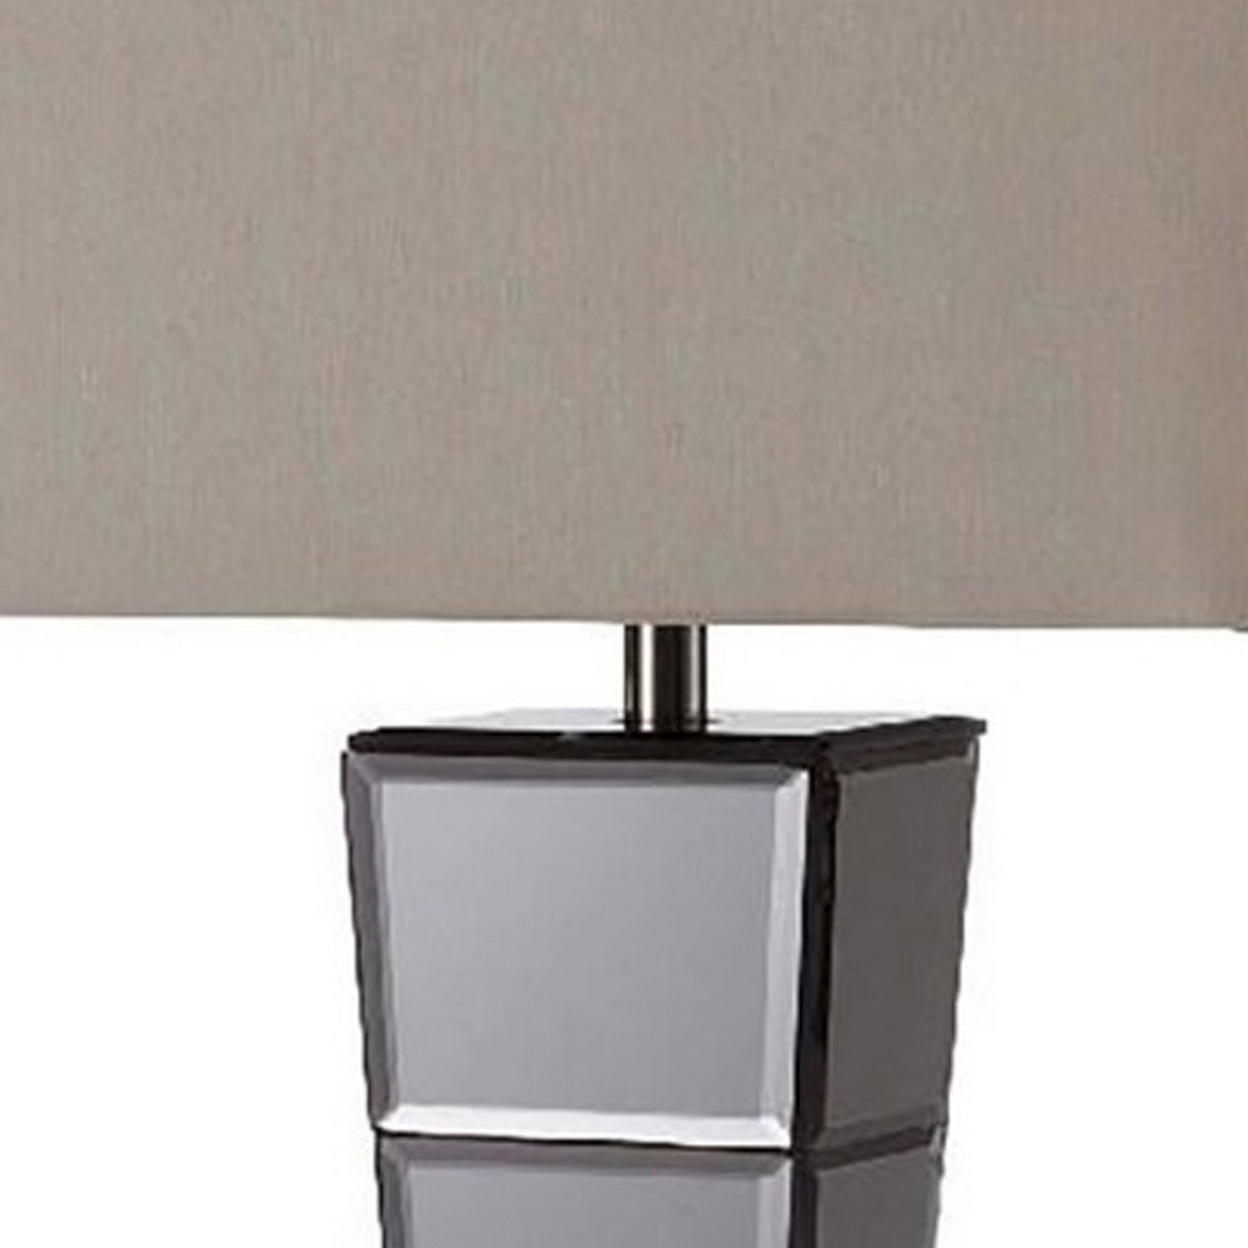 Table Lamp With Mirrored Tower Design Body, Silver- Saltoro Sherpi